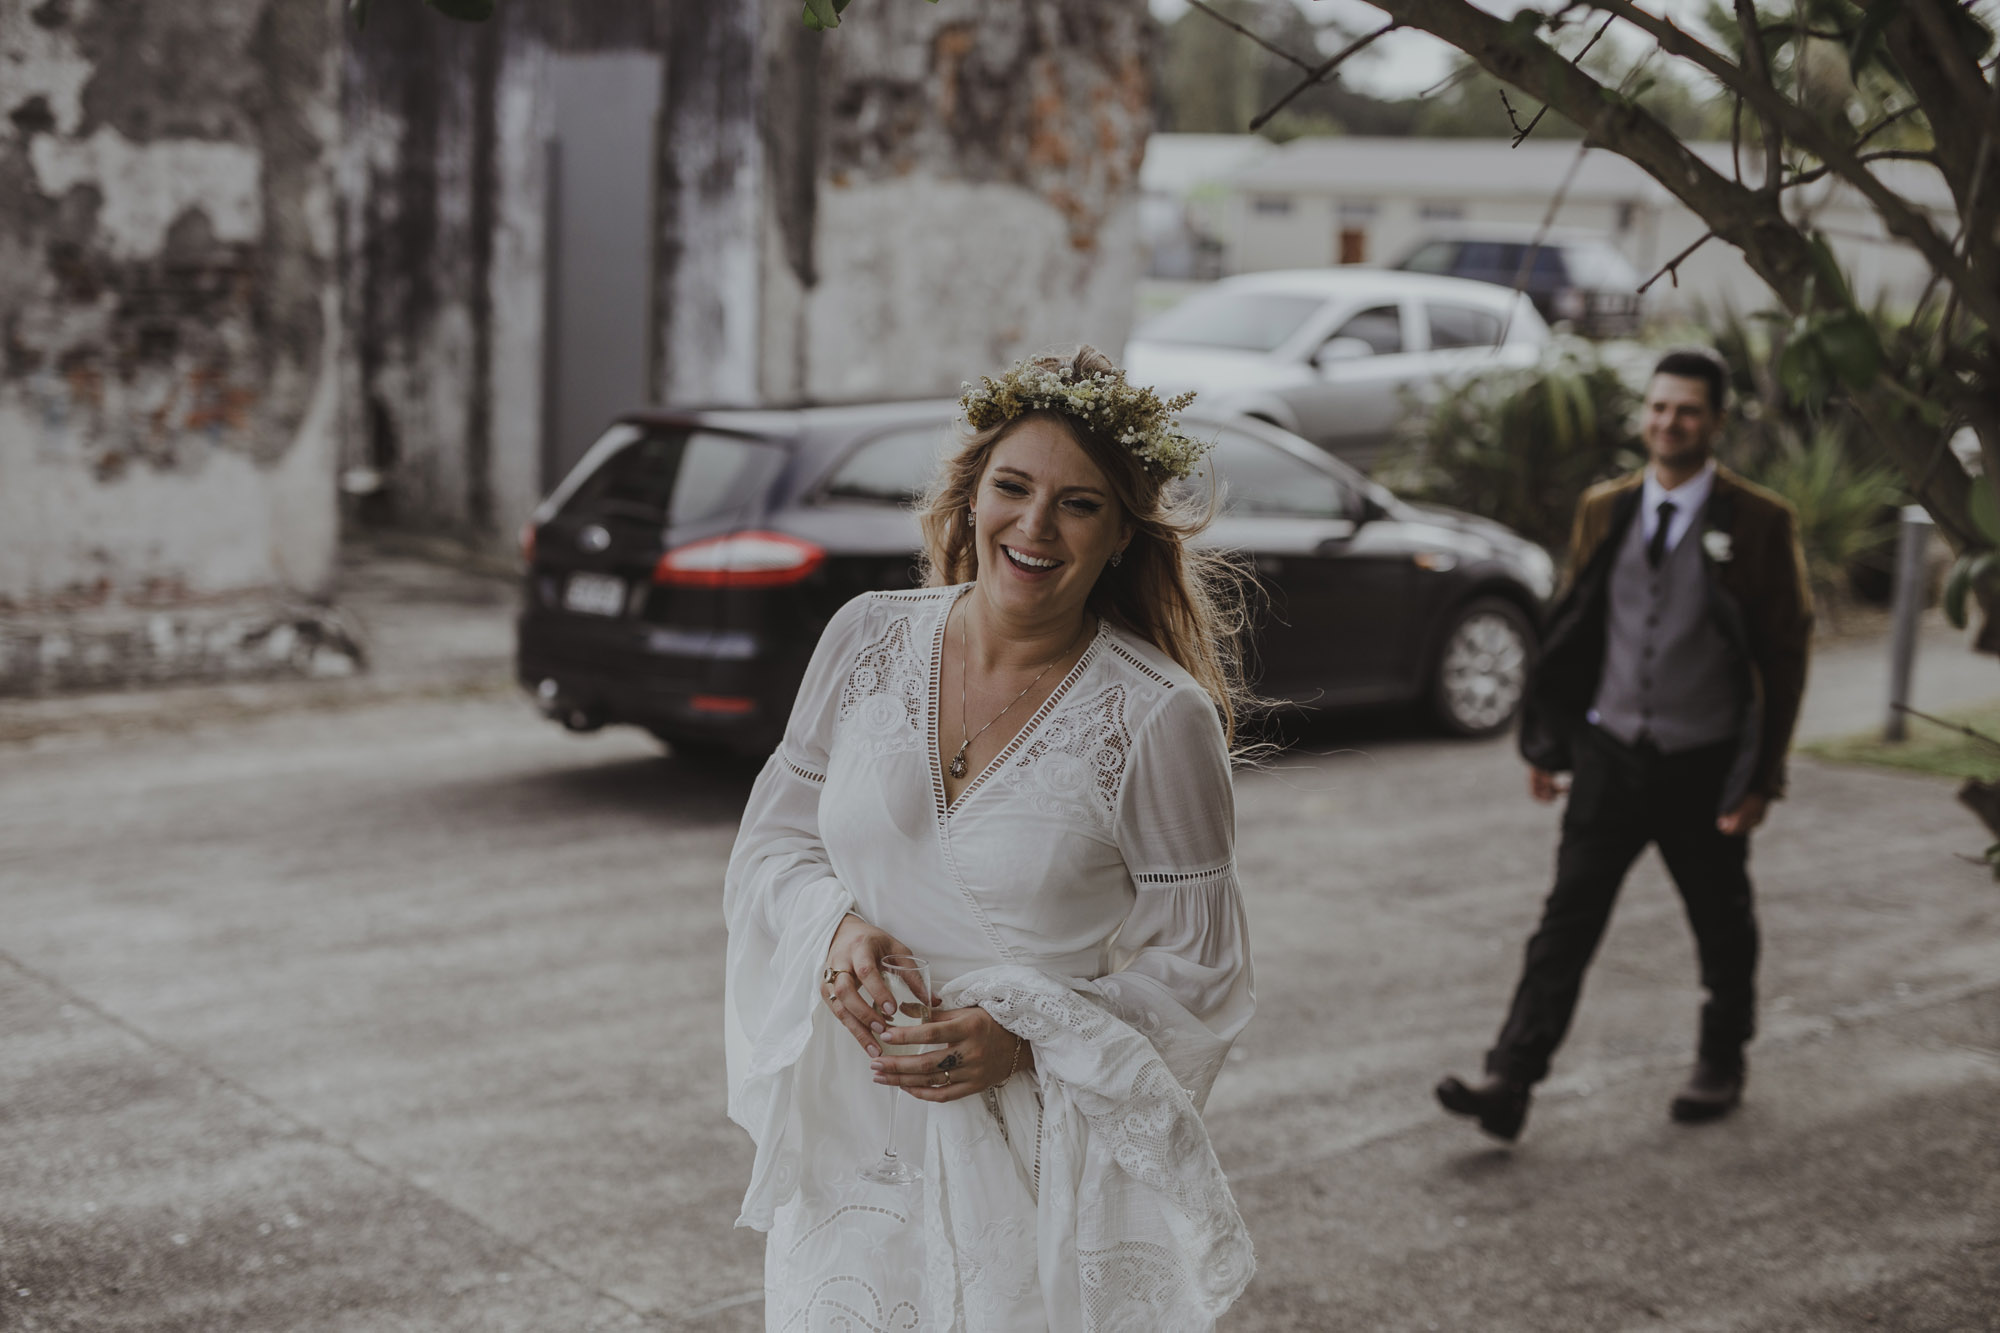 40 A low key New Zealand Estate wedding with a bohemian vintage vibe